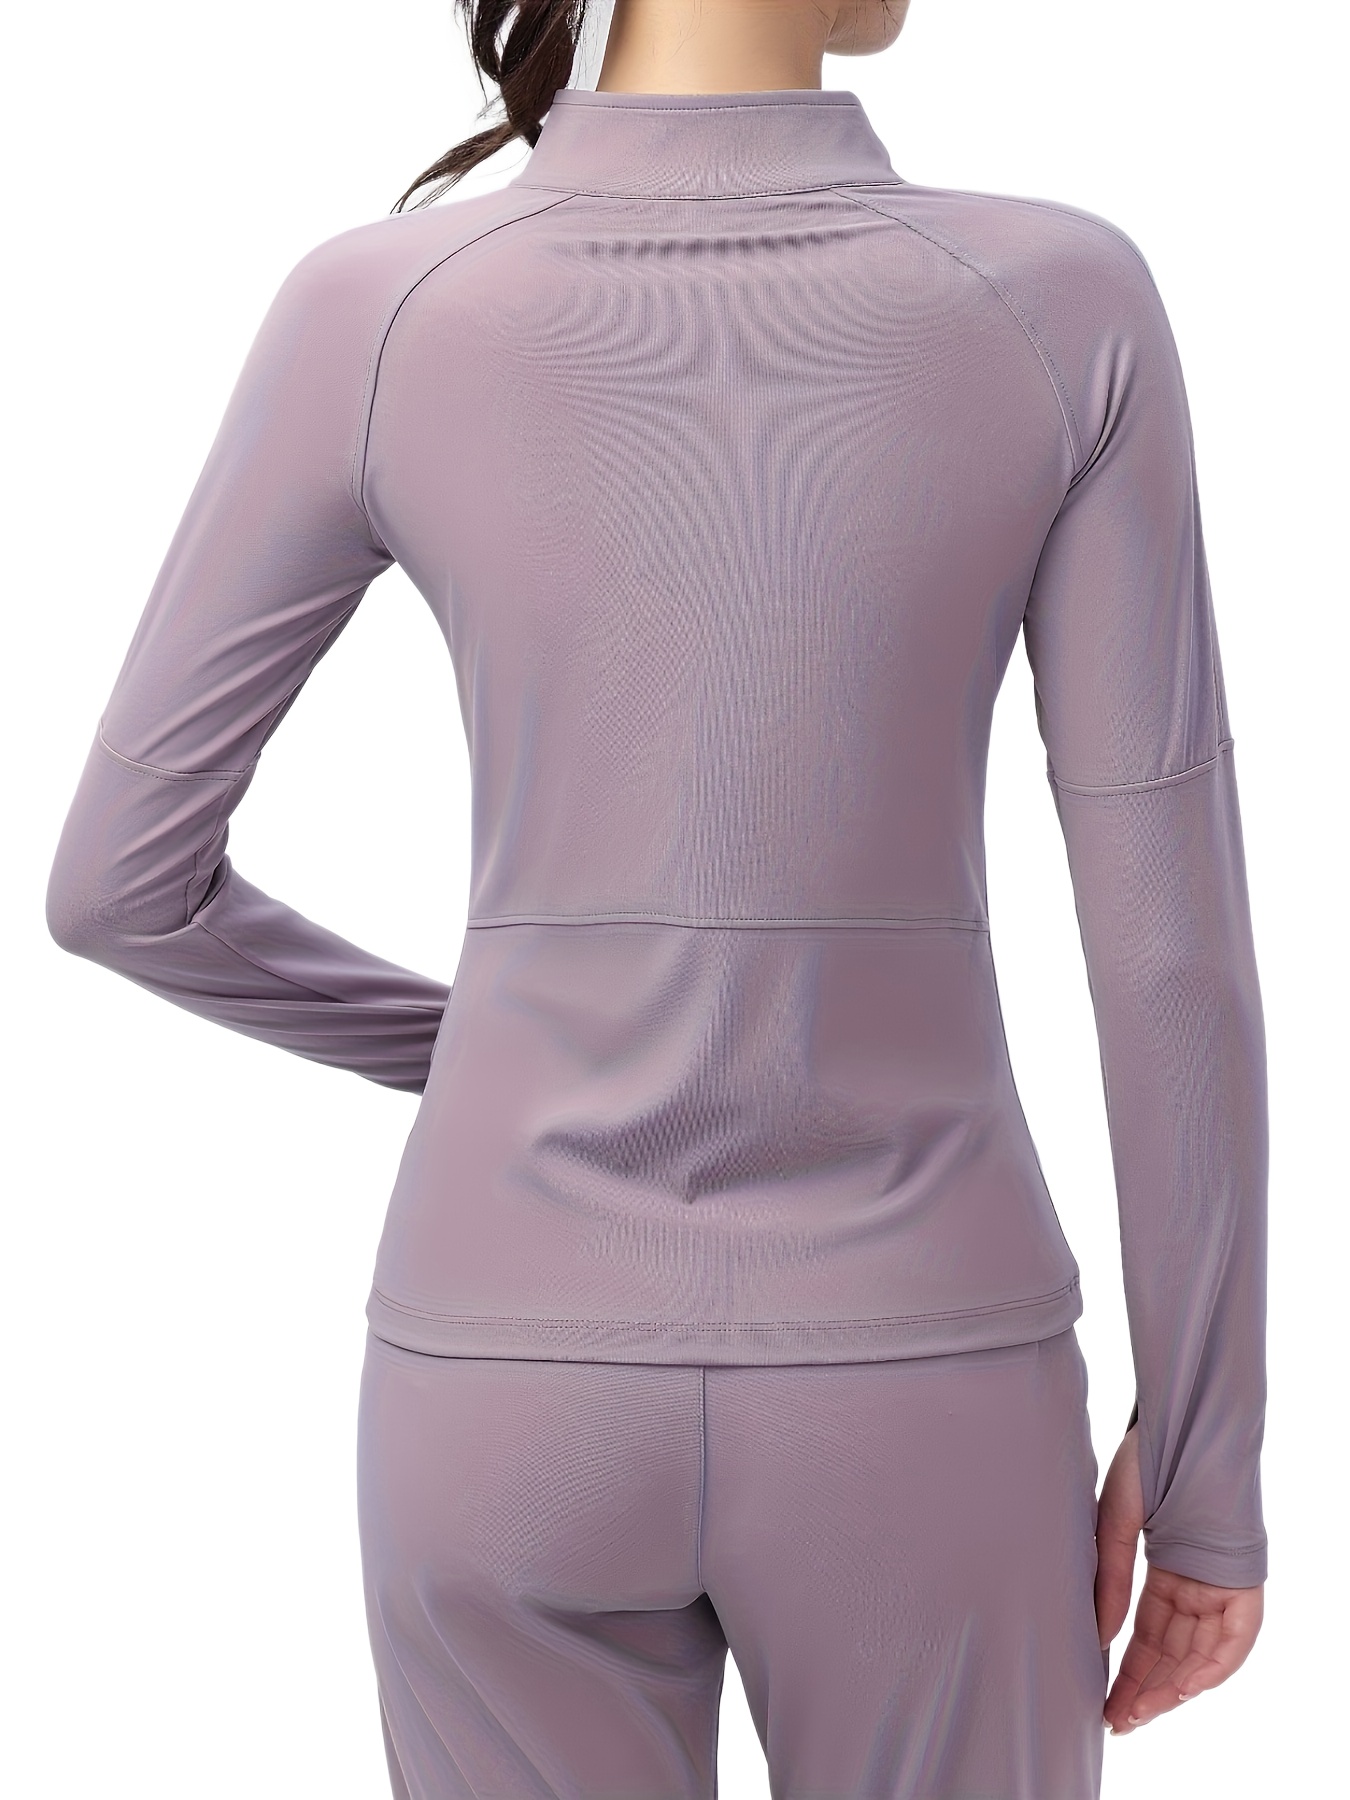 Hfyihgf Women's Long Sleeve Running Shirts with Thumbholes Stretch  Breathable Athletic Quick Dry Mesh Back Yoga Tops Workout T-Shirt(Purple,M)